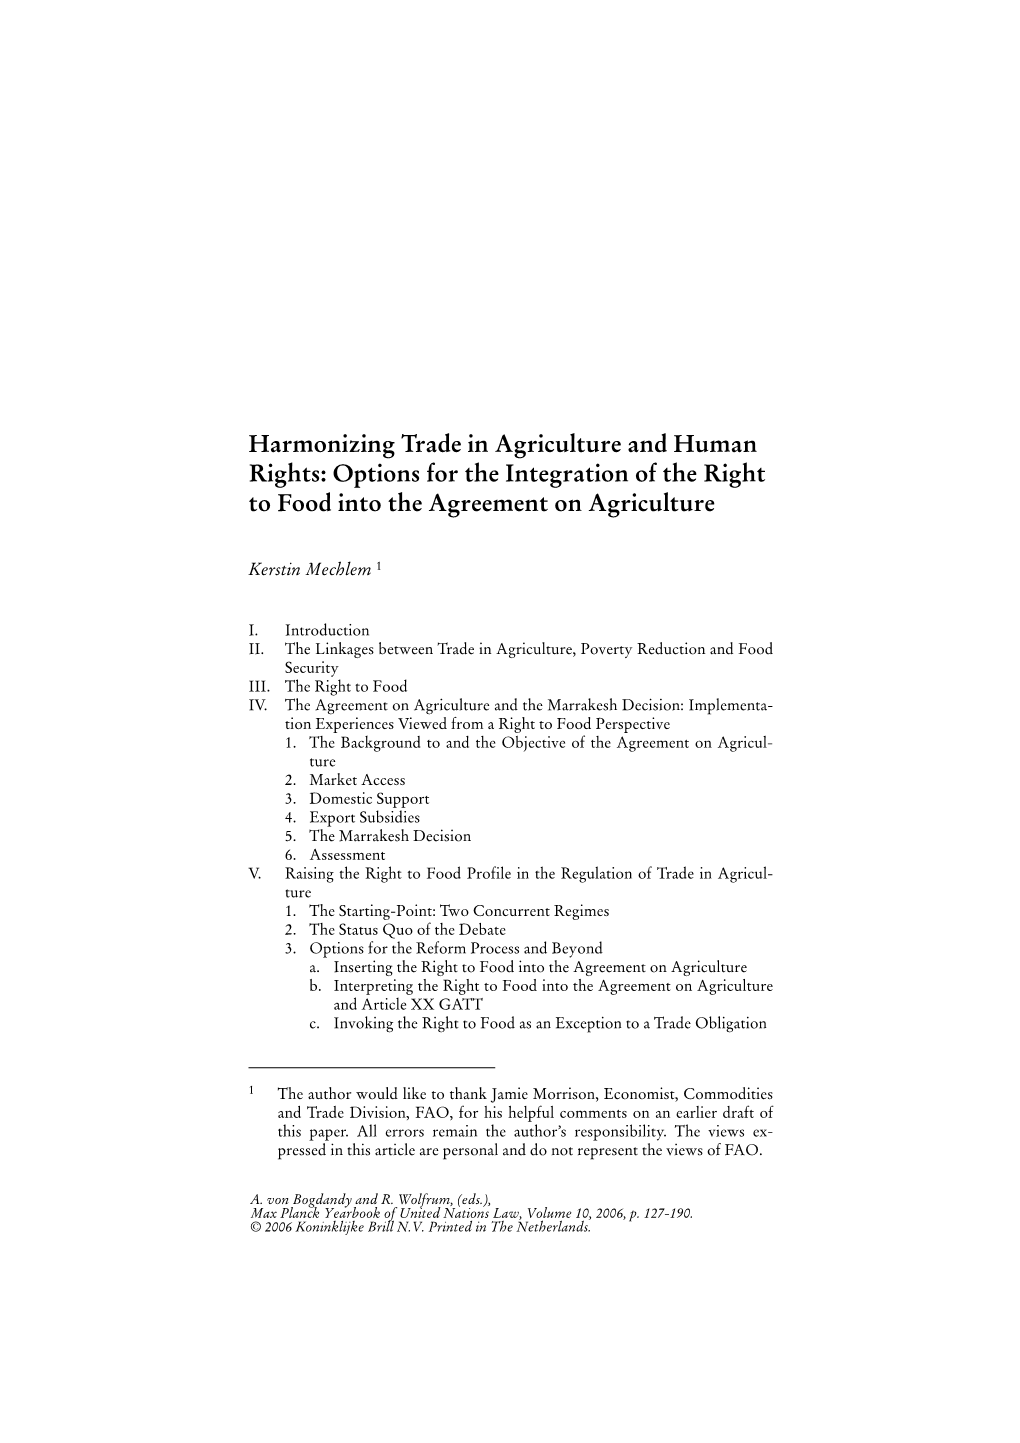 Harmonizing Trade in Agriculture and Human Rights: Options for the Integration of the Right to Food Into the Agreement on Agriculture